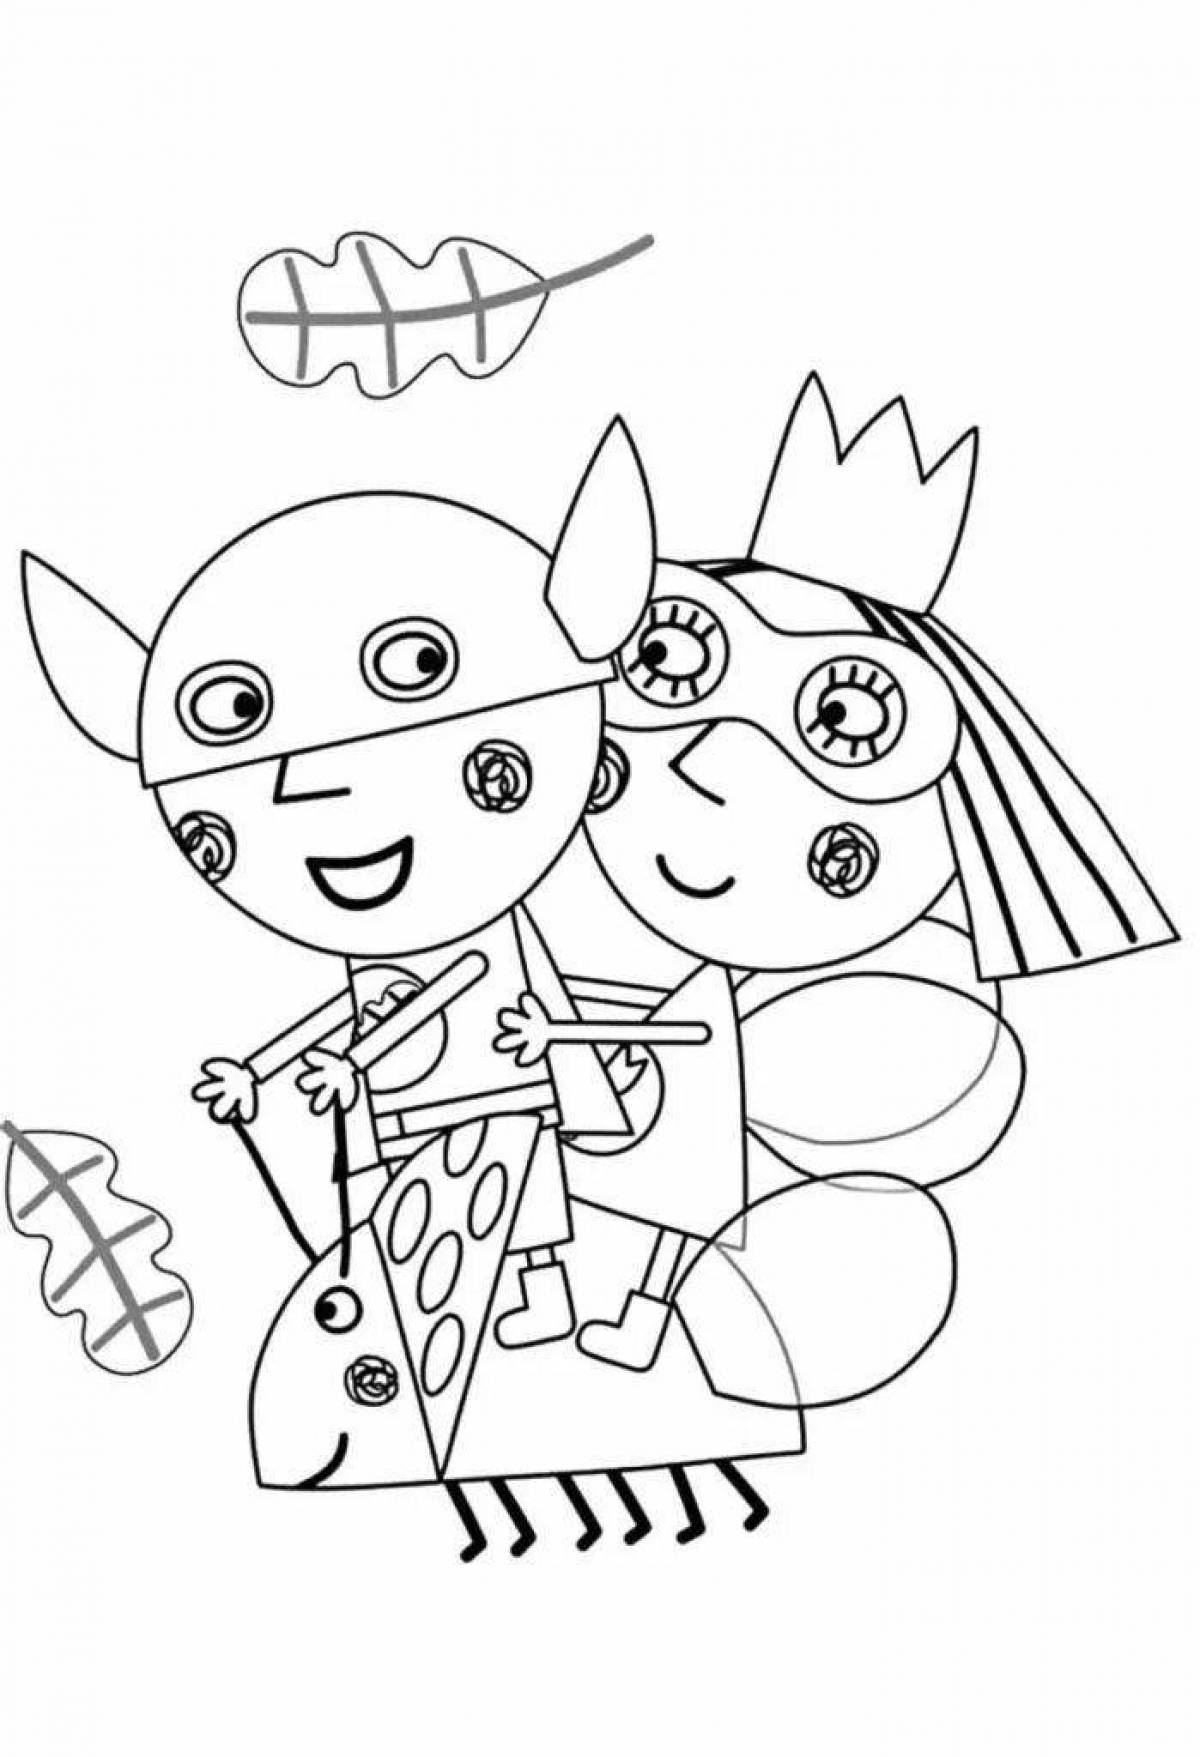 Tempting ben and holly's kingdom coloring book